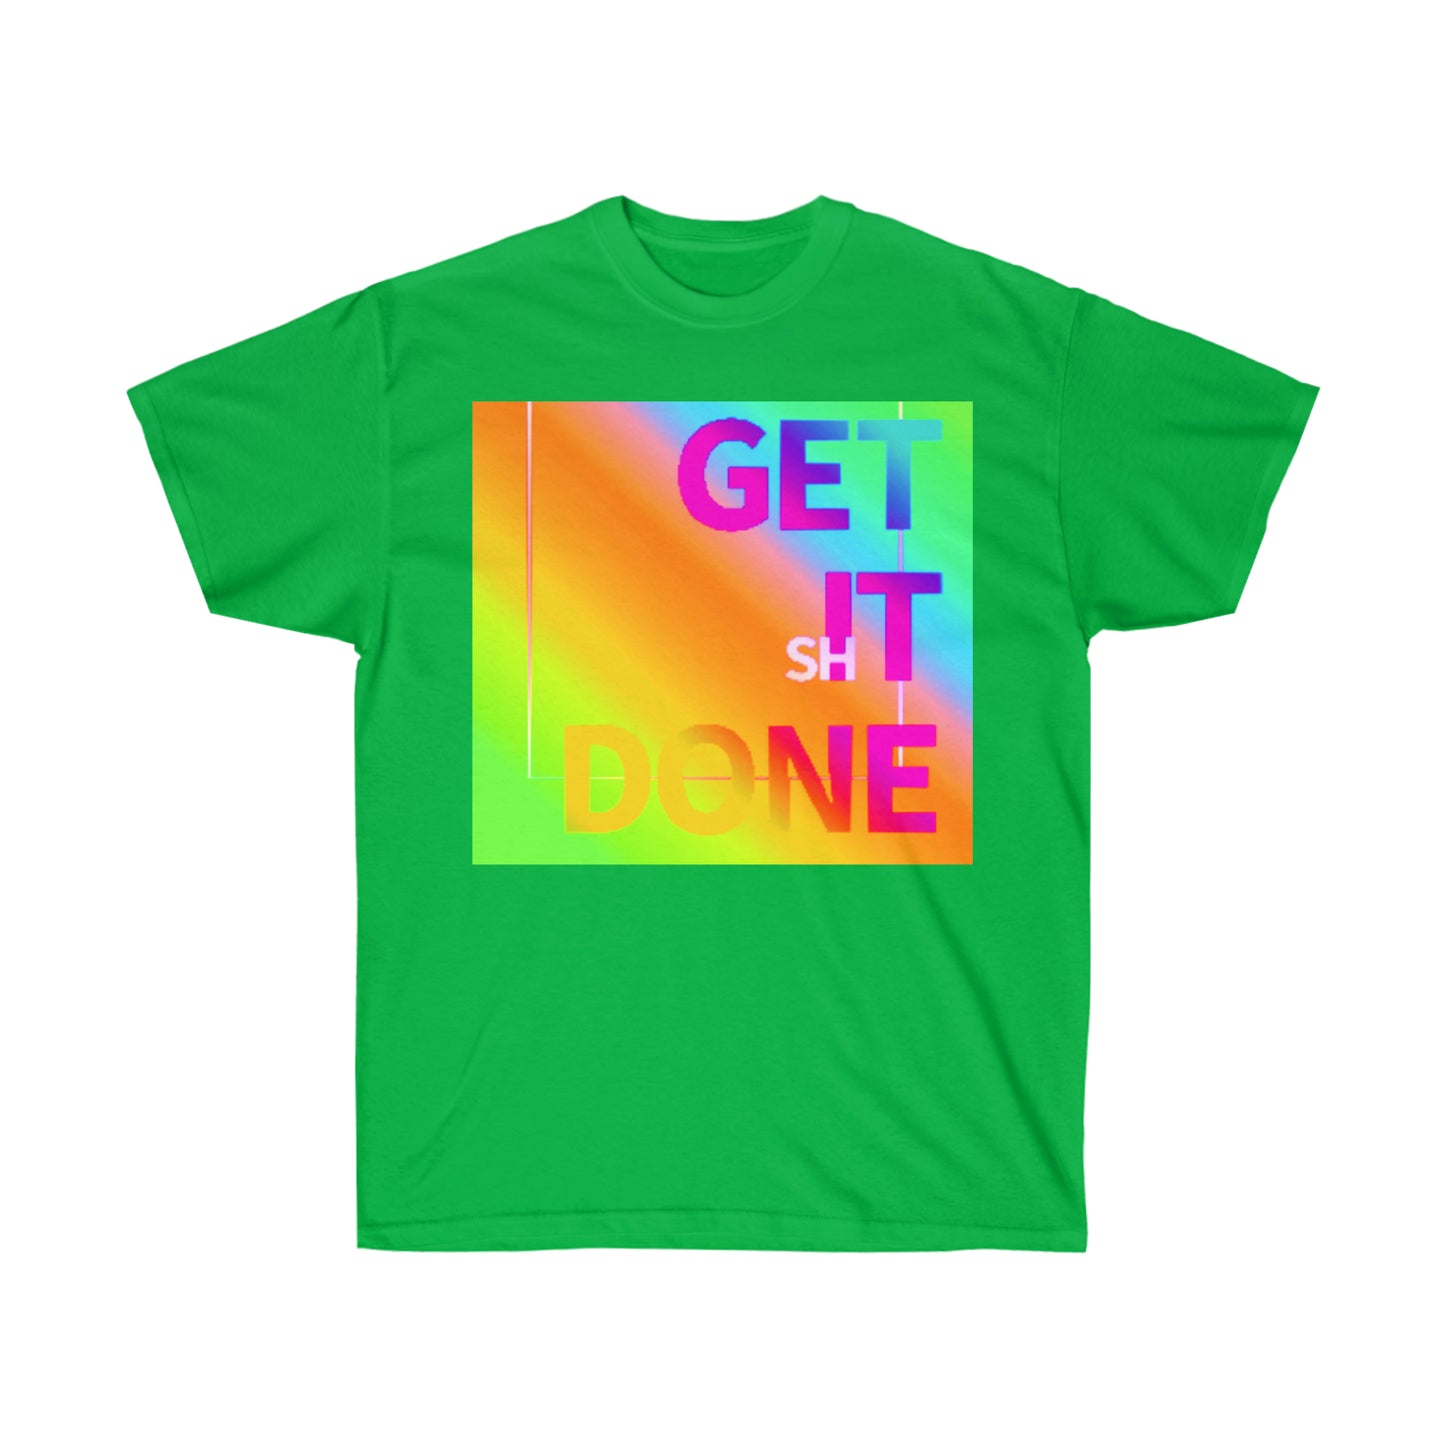 Get it done! - Unisex Ultra Cotton Tee